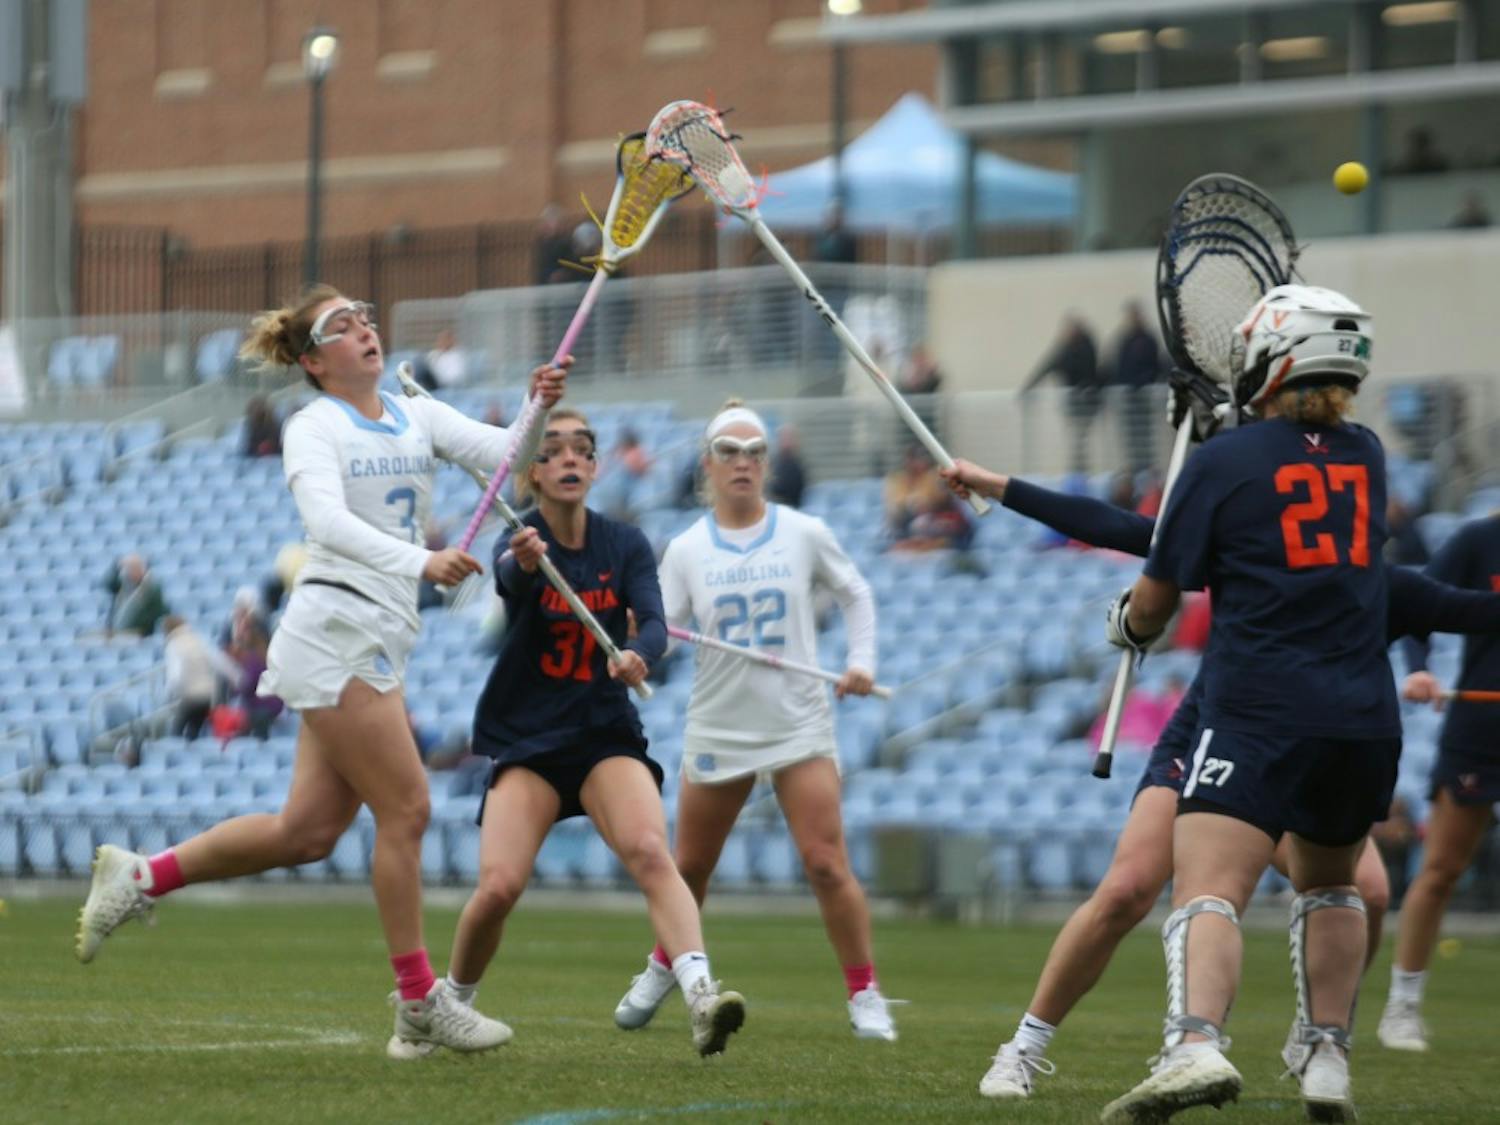 Sophomore attacker Jamie Ortega (3) and first-year attacker Tayler Warehime (22) play during UNC Women's lacrosse first ACC game. UNC defeated UVA 13-12 at Fetzer Field in Chapel Hill on Saturday, March 9, 2019.